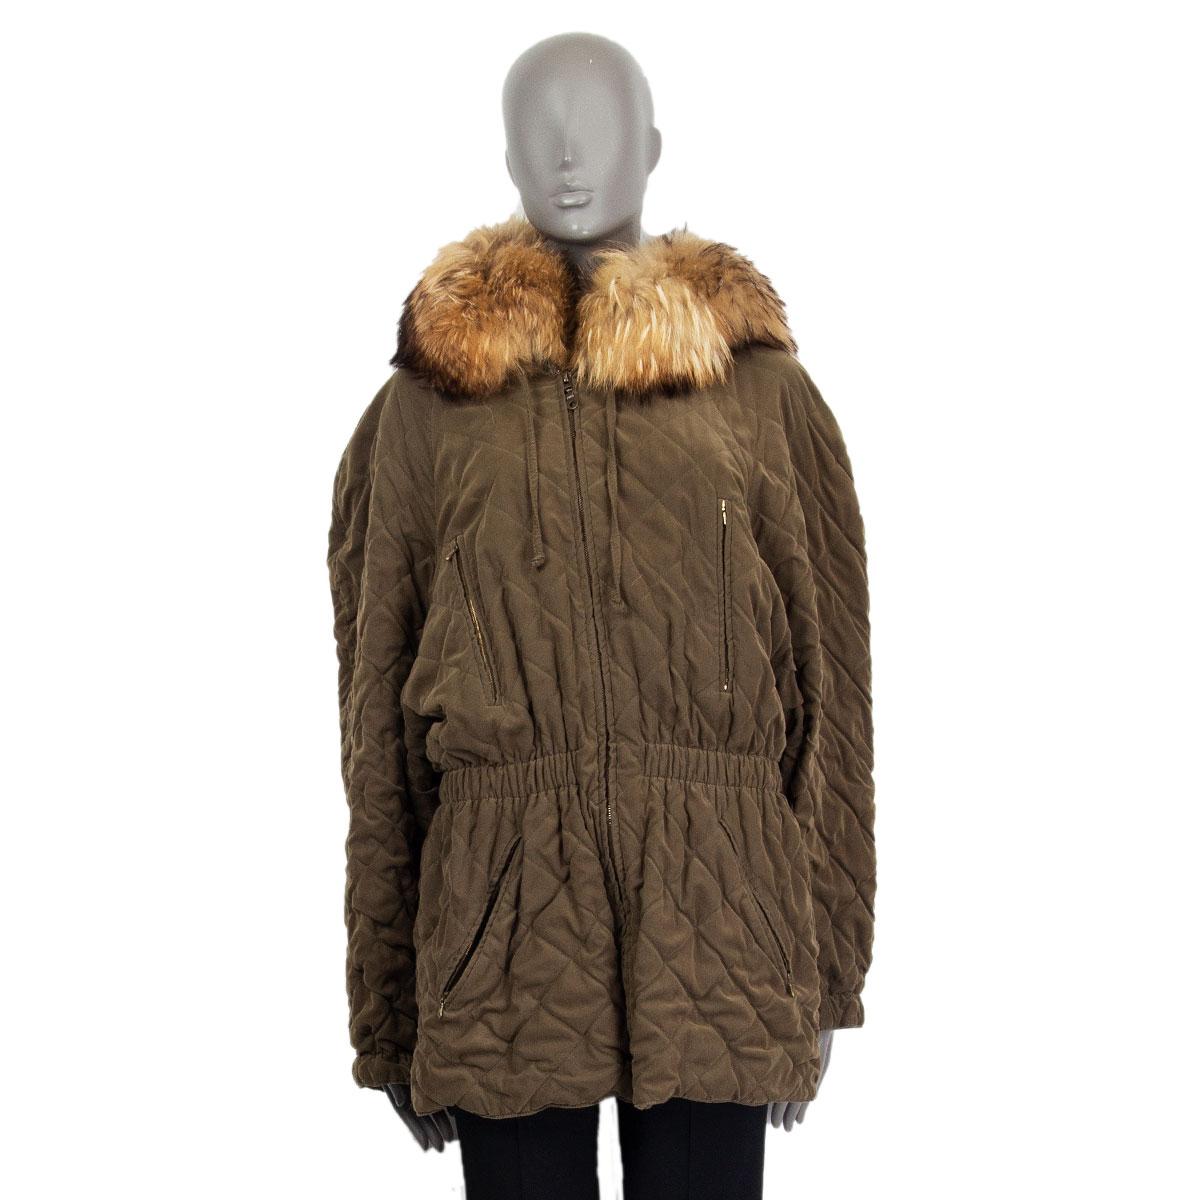 Hermes quilted oversized fox fur trim hood jacket in olive green polyester (85%) and polyamide (15%). Has four zipped pockets at the front and an elastic waist band to emphasize the silhouette. Opens with a zipper on the front. Lined in olive green